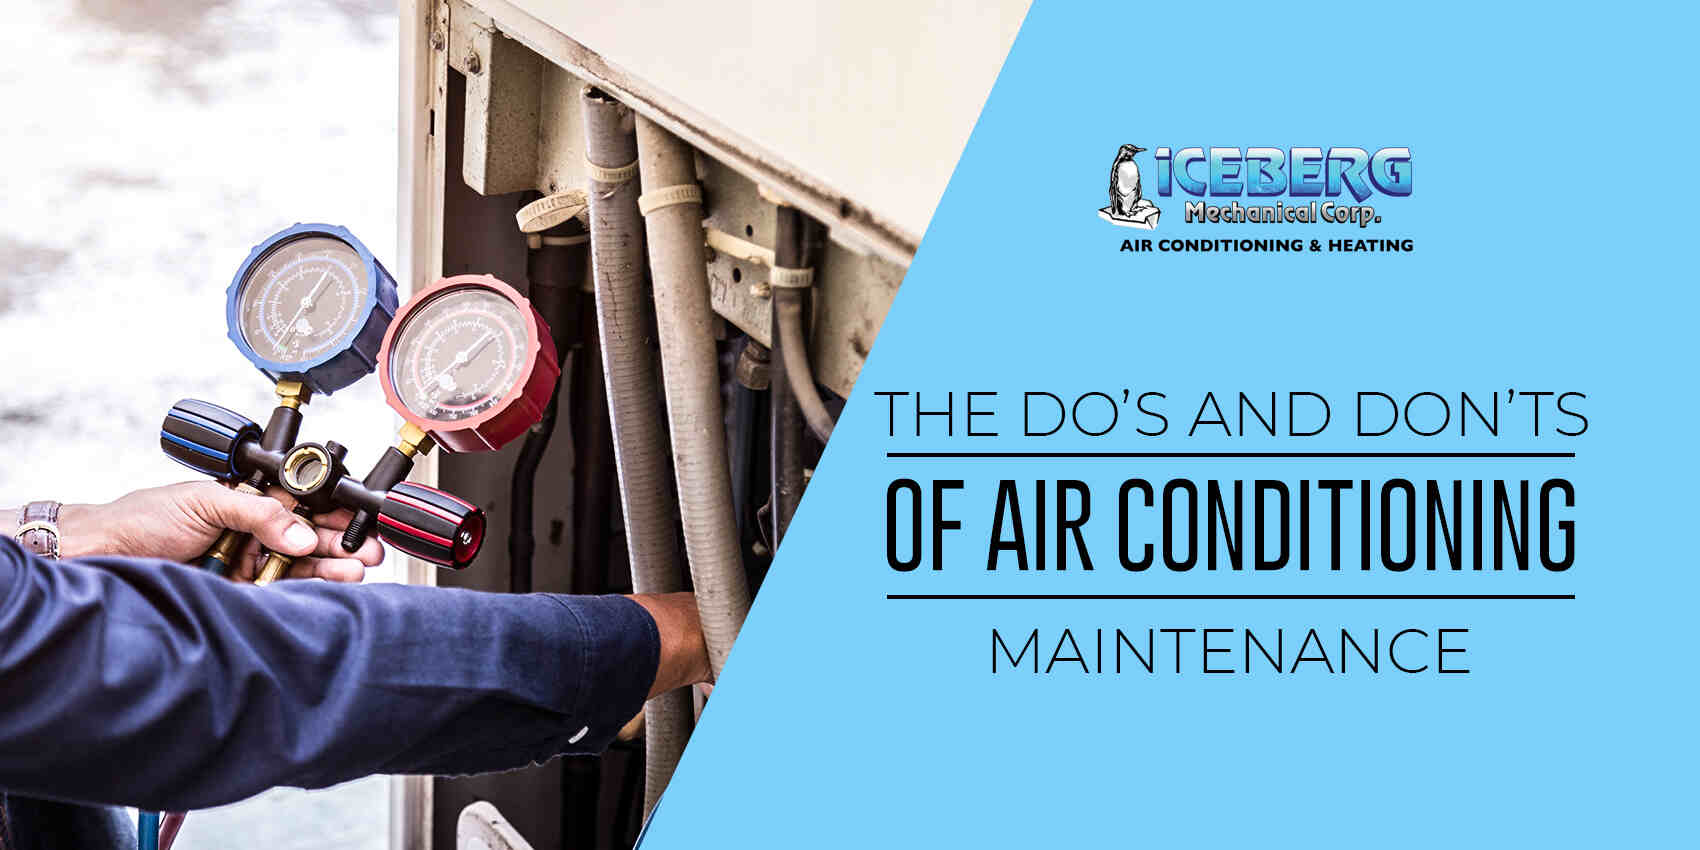 The Do’s And Don’ts of Air Conditioning Maintenance